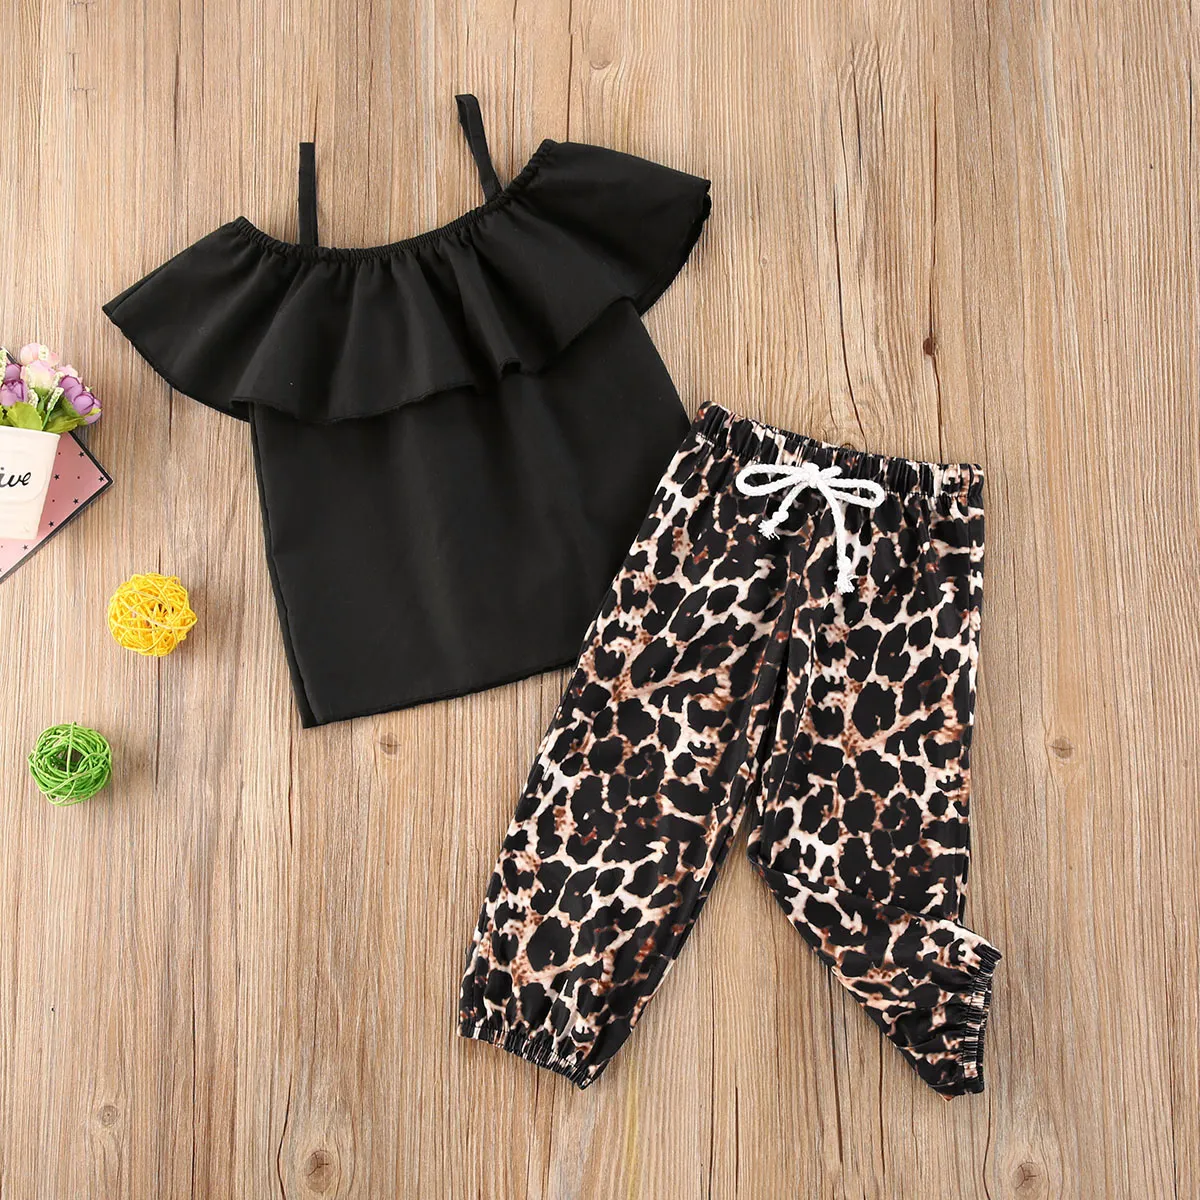 1-5Y Fashion Toddler Kids Baby Girl Clothes Sets Off Shoulder T-shirt Tops+Ruffles Skirt Outfit Clothes